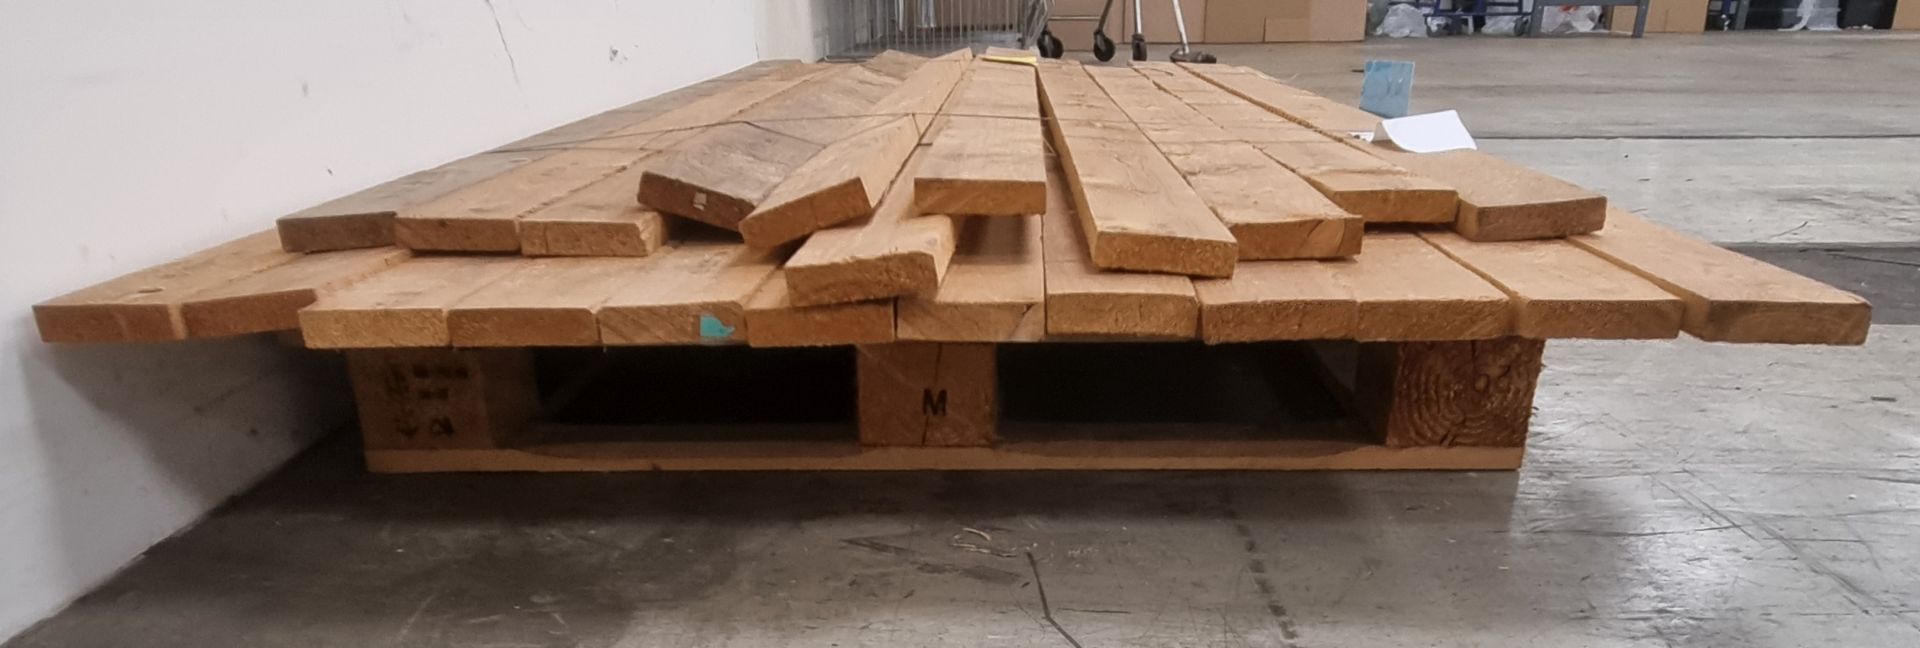 Pallet of 4"x1" softwood various lengths & Pallet of 4"x1" softwood 44pcs - Image 9 of 9